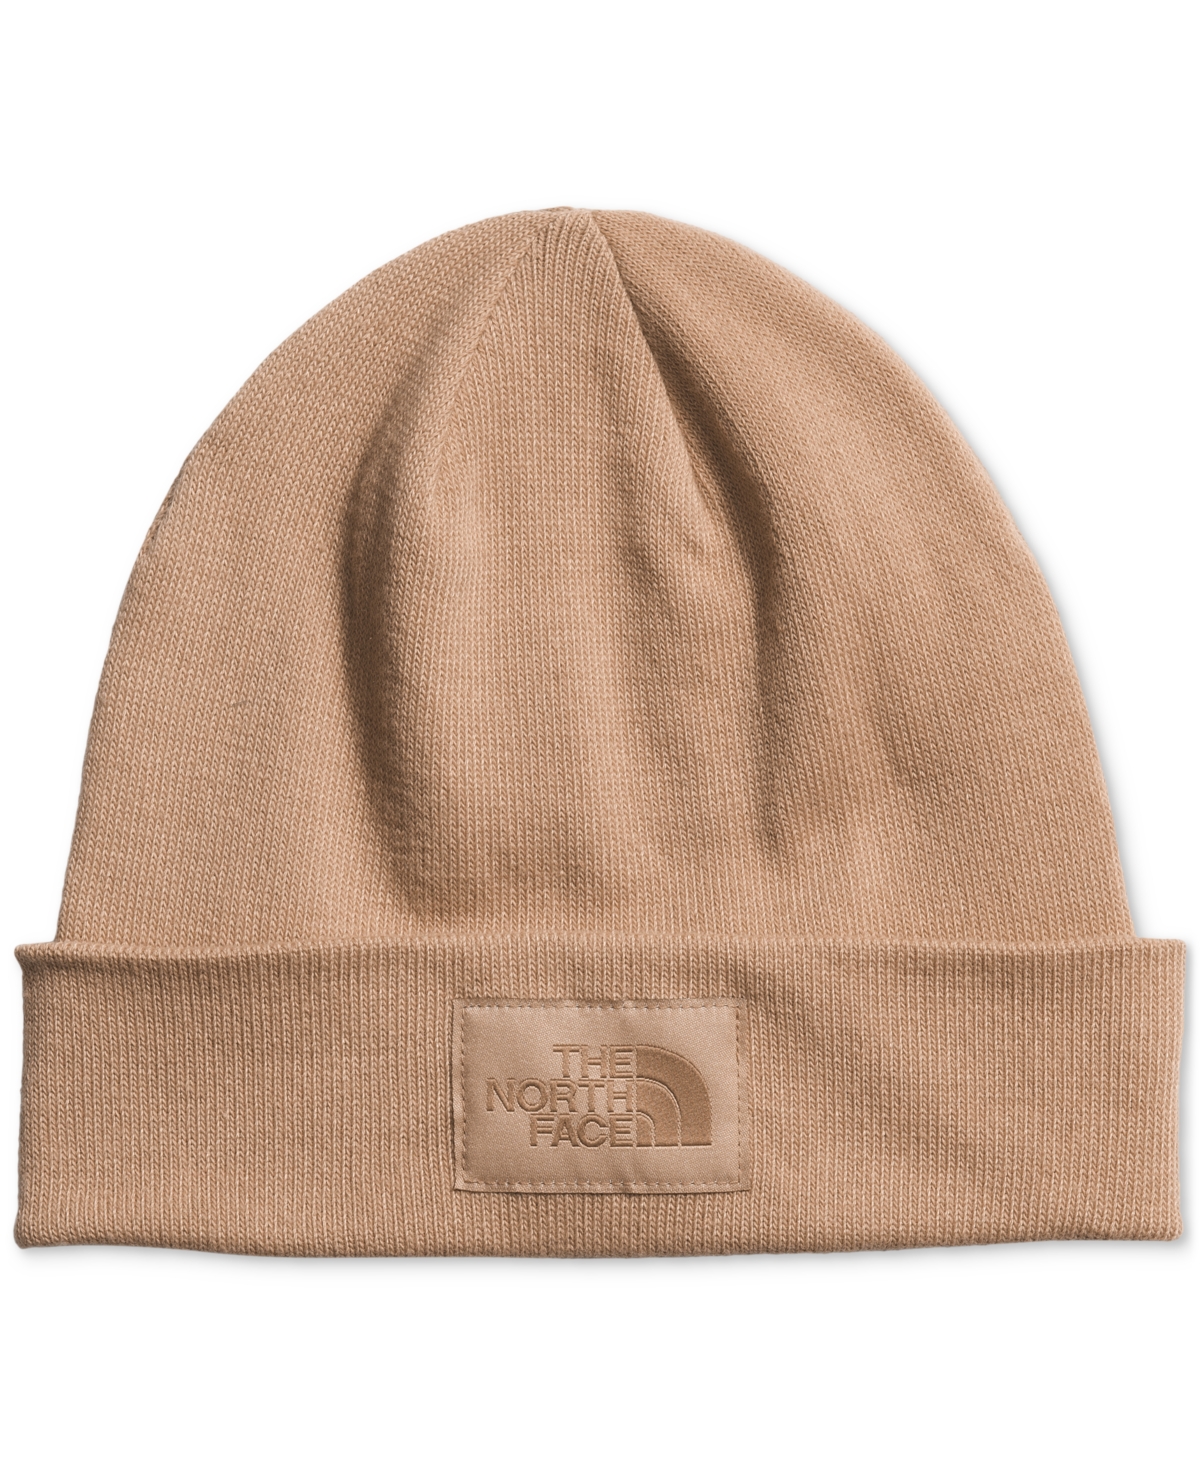 THE NORTH FACE MEN'S DOCK WORKER RECYCLED BEANIE